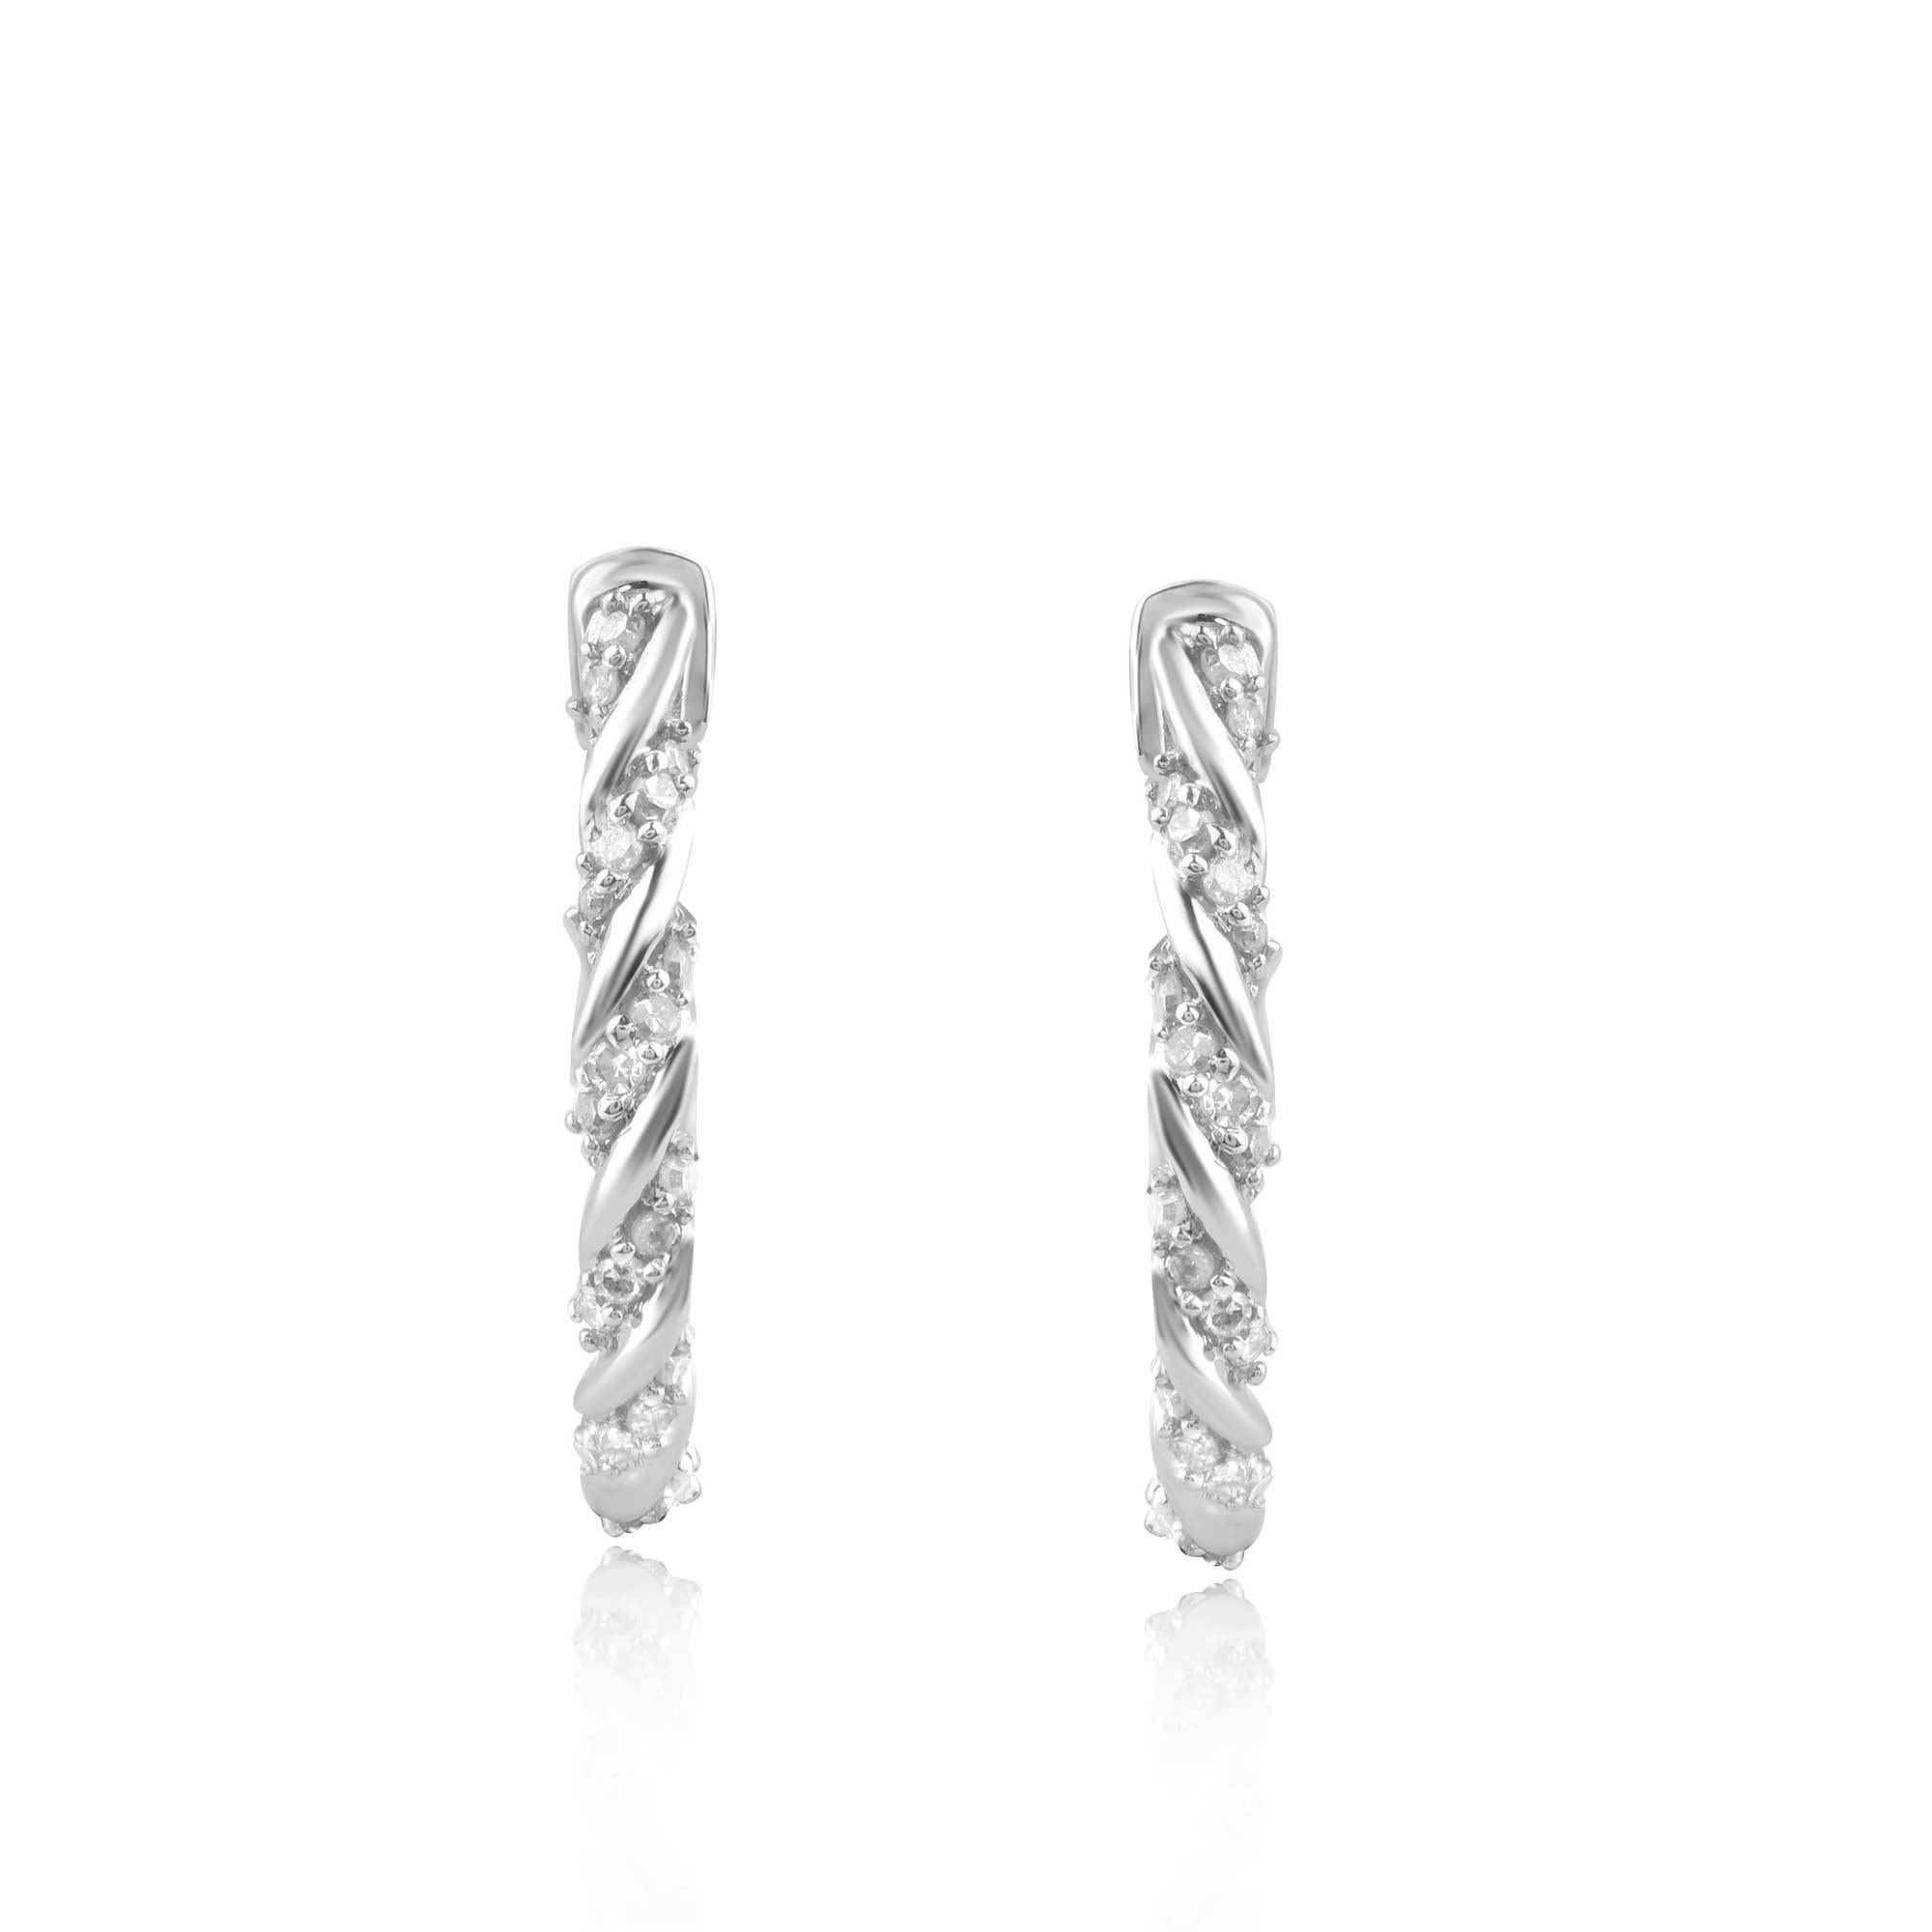 Classic and stylish diamond studded hoop earrings! perfect for daily wear. Crafted in 14 Karat white gold with 44 single cut diamond in prong setting. These earring secure with hinged backs. The white diamonds are graded as H-I color and I-2 clarity.